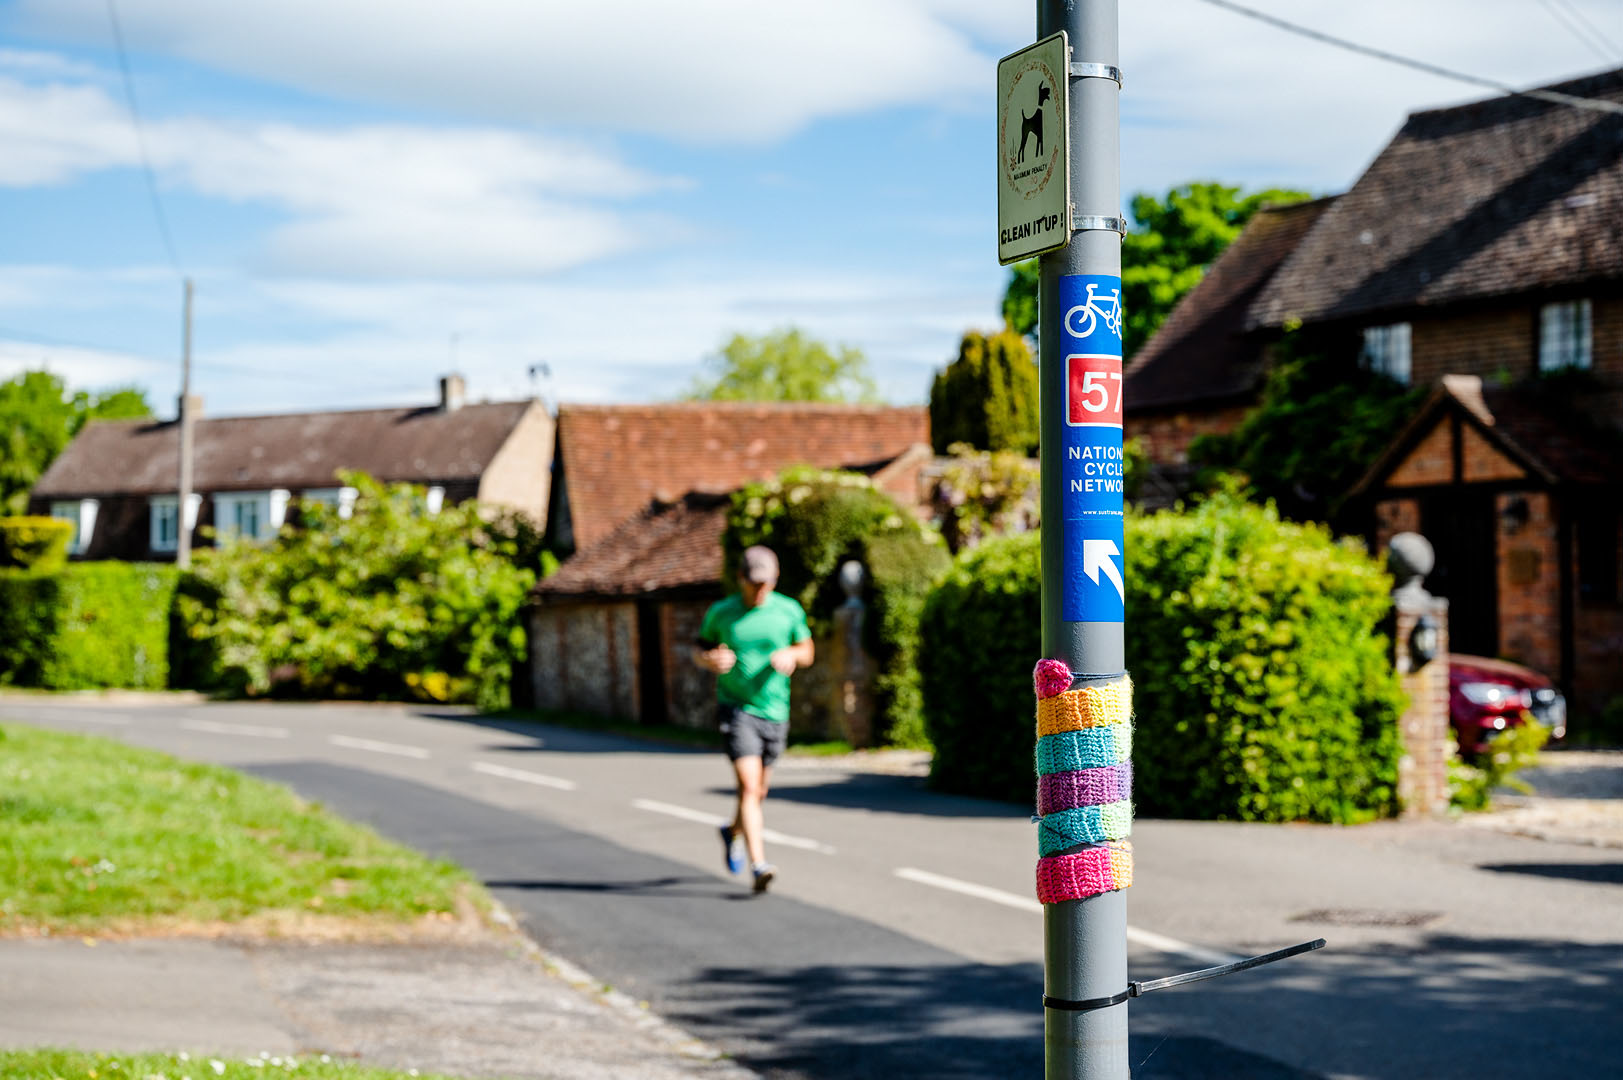 Solitary jogger on empty road passing rainbow adorned signpost during lockdown